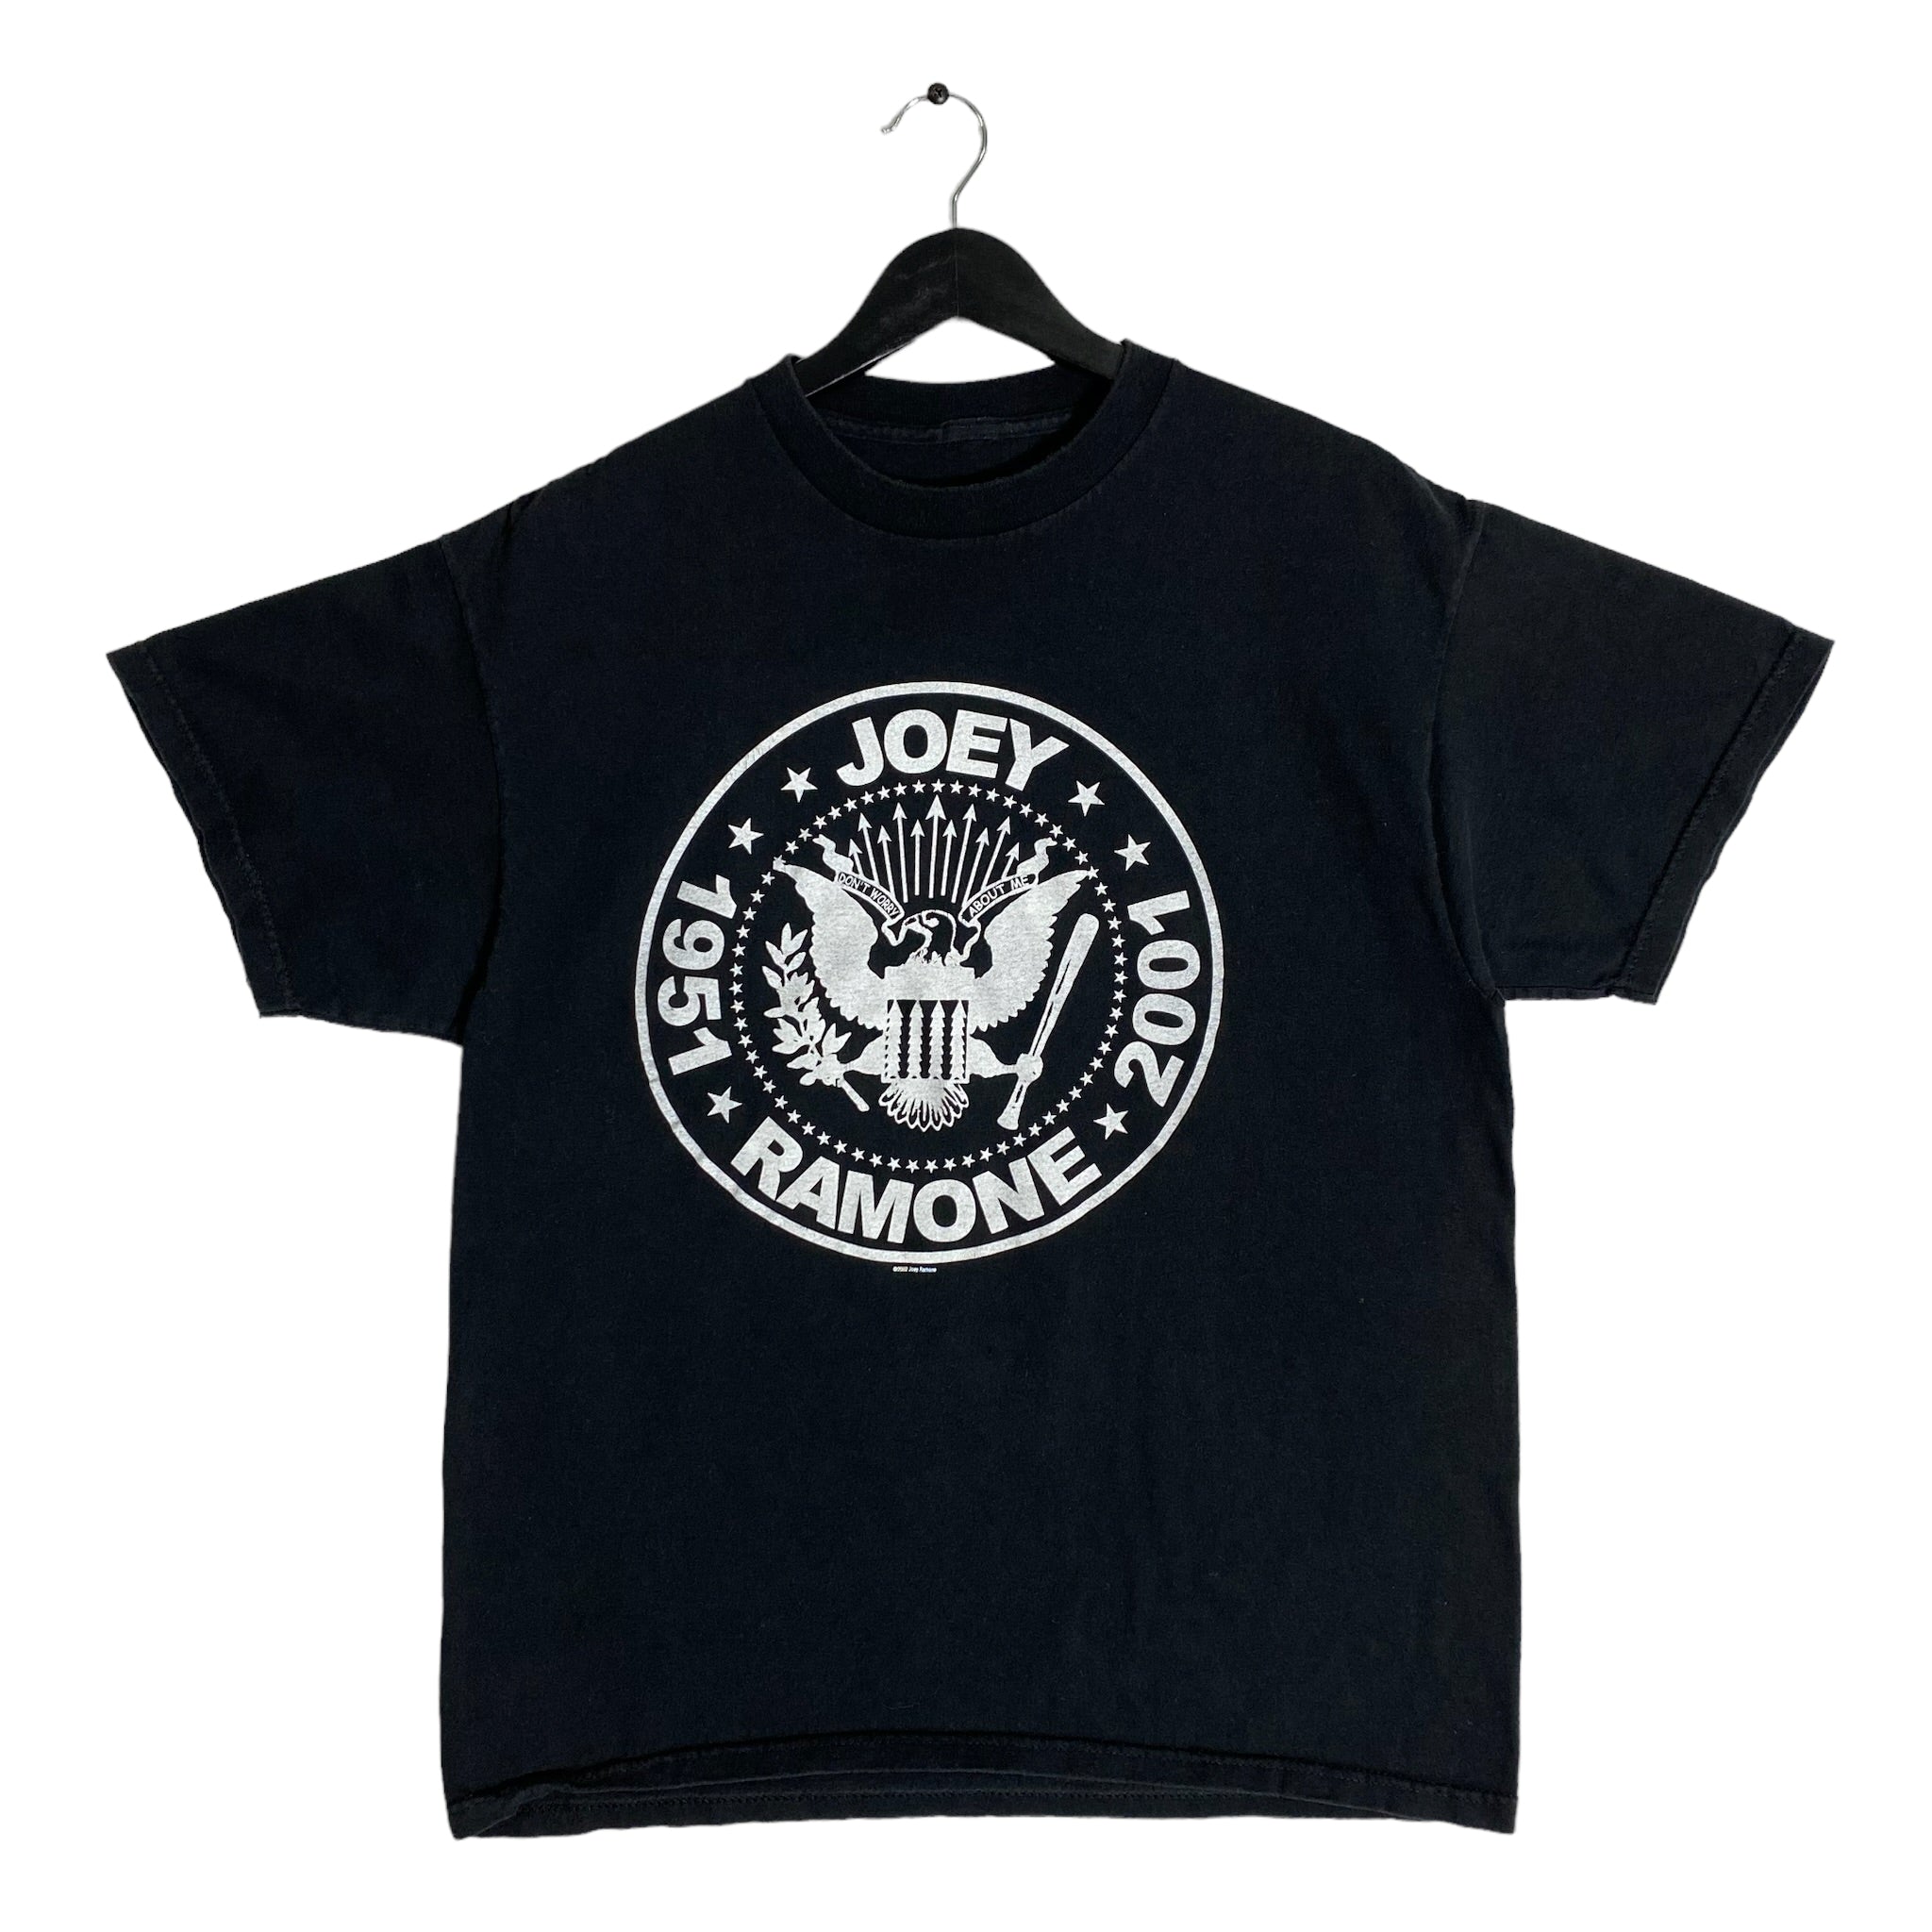 Vintage Joey Ramone "Don't Worry About Me" Tee 2001